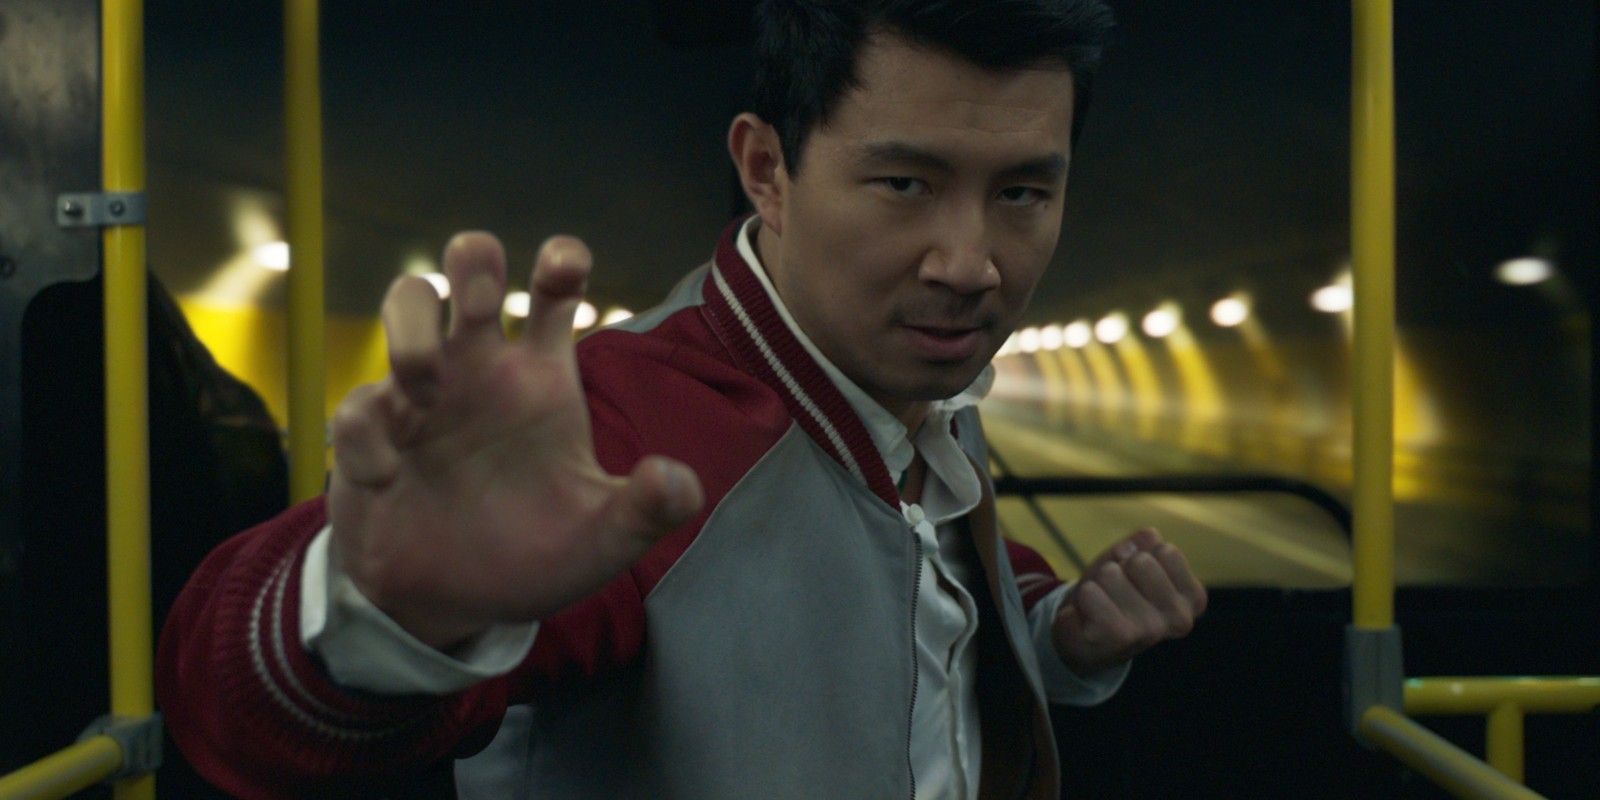 Shang-Chi holds up his fist and prepares to fight